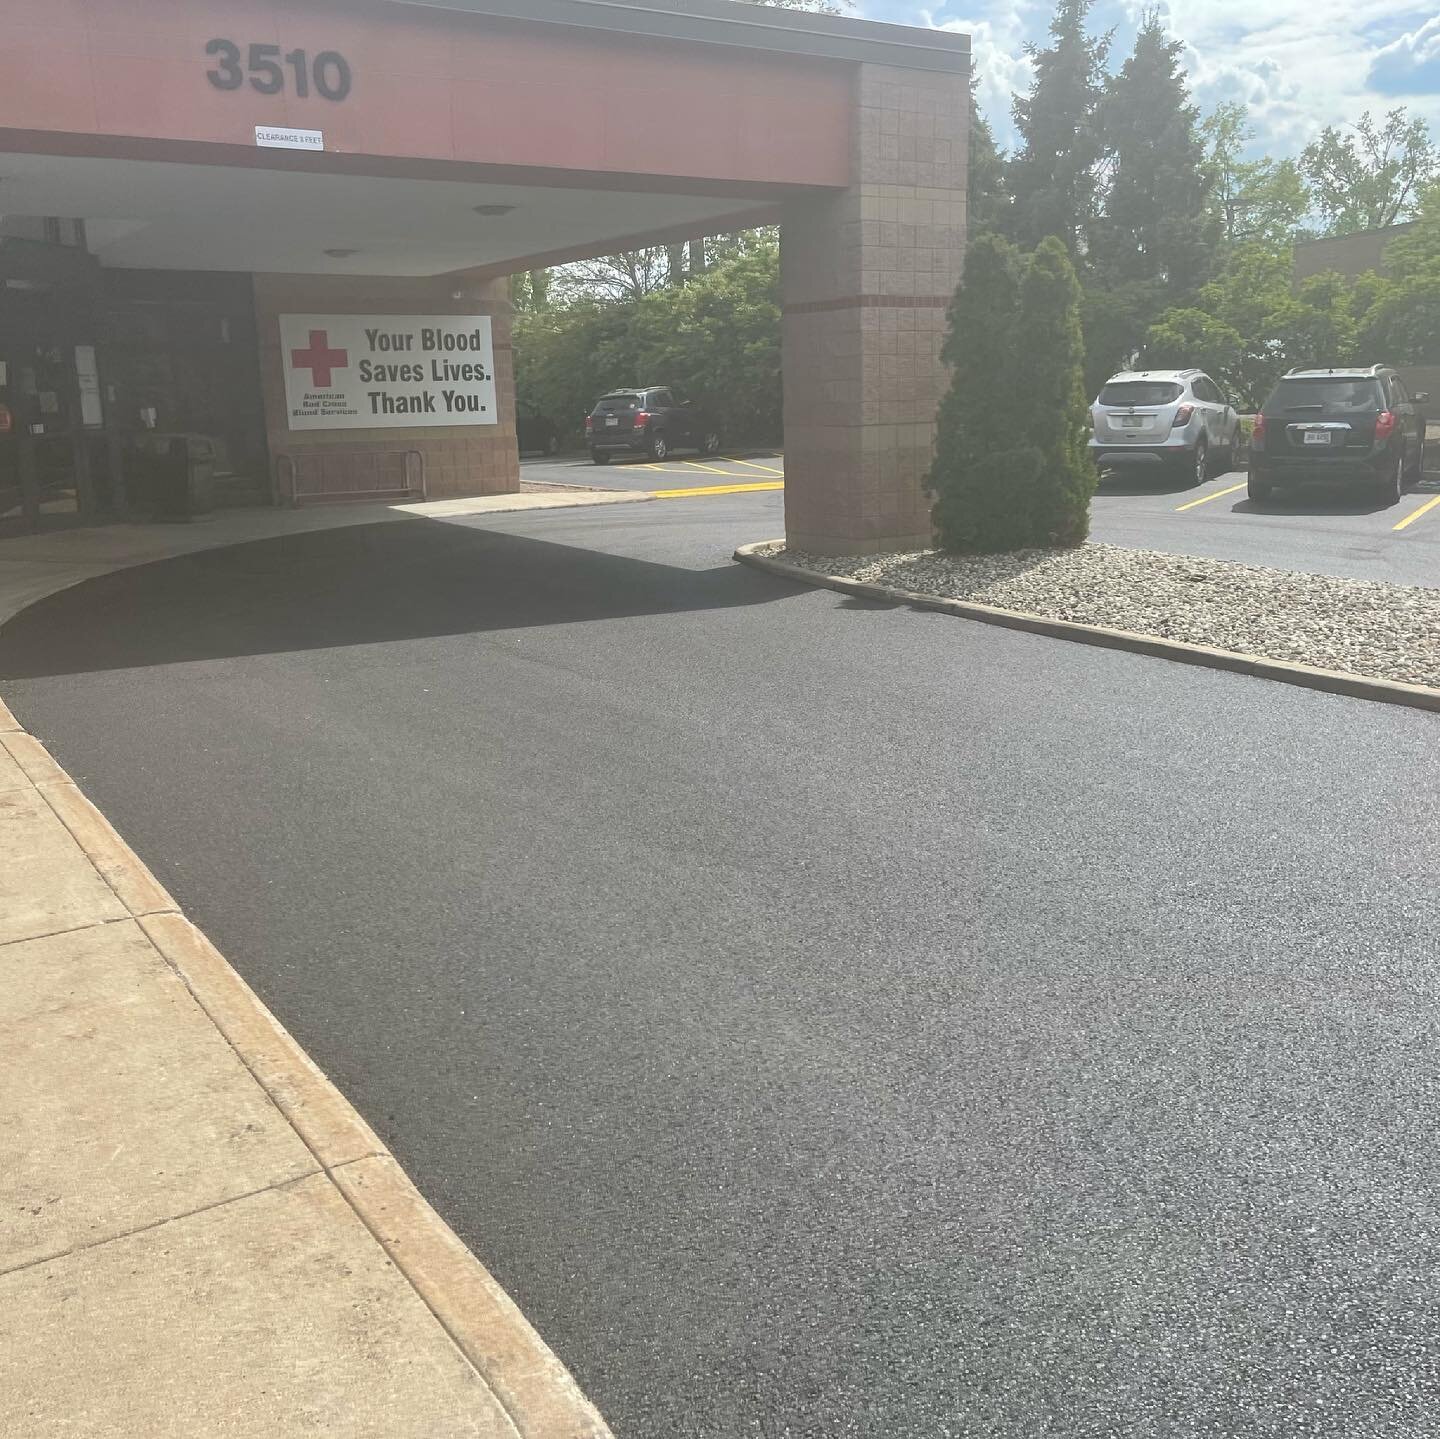 1.5 inch mill and a full repave at Red Cross donation center in Toledo!